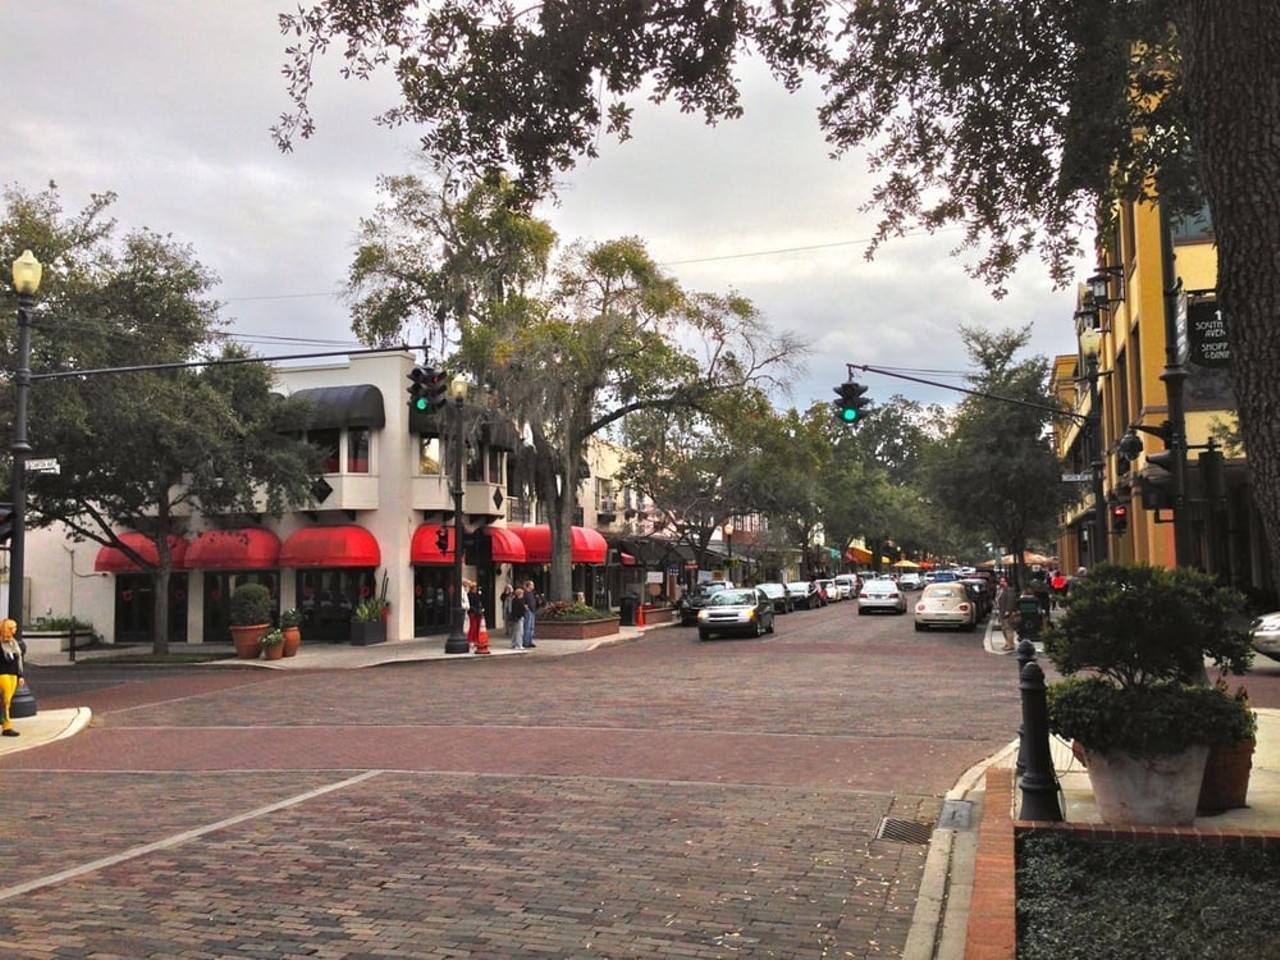 Explore Park Avenue
Winter Park
Plan a solo date at Winter Park’s Park Avenue shopping district, where you can explore plenty of eateries, shops, boutiques and charming sights to see. Don't trip on the cobblestones.